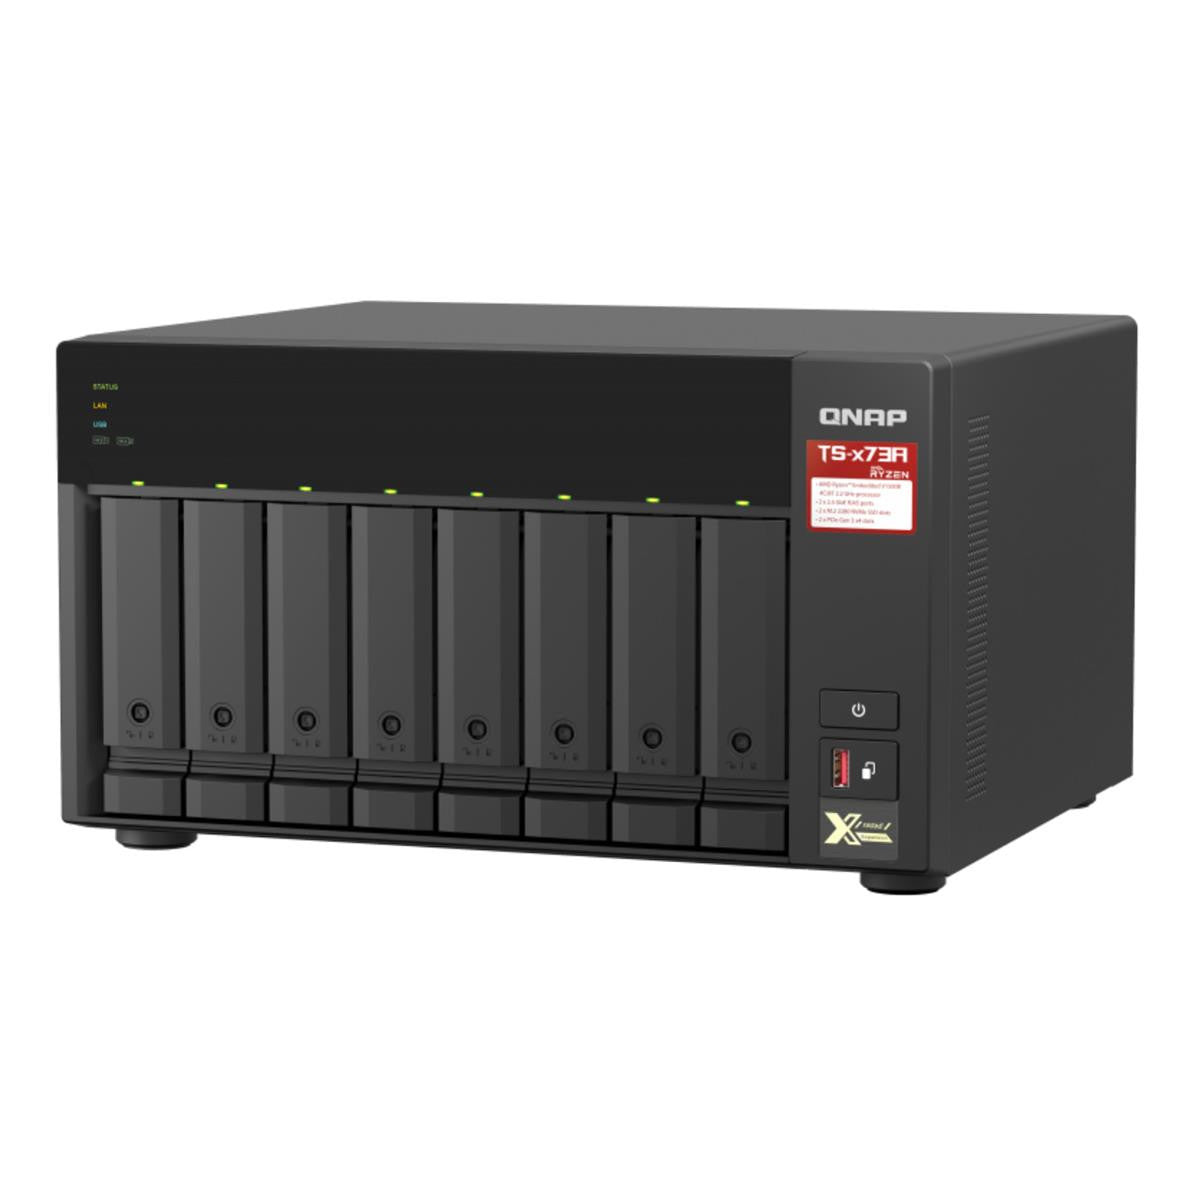 QNAP TS-873A 8-BAY NAS with 16GB DDR4 RAM and 80TB (8x10TB) Seagate Ironwolf NAS Drives Fully Assembled and Tested